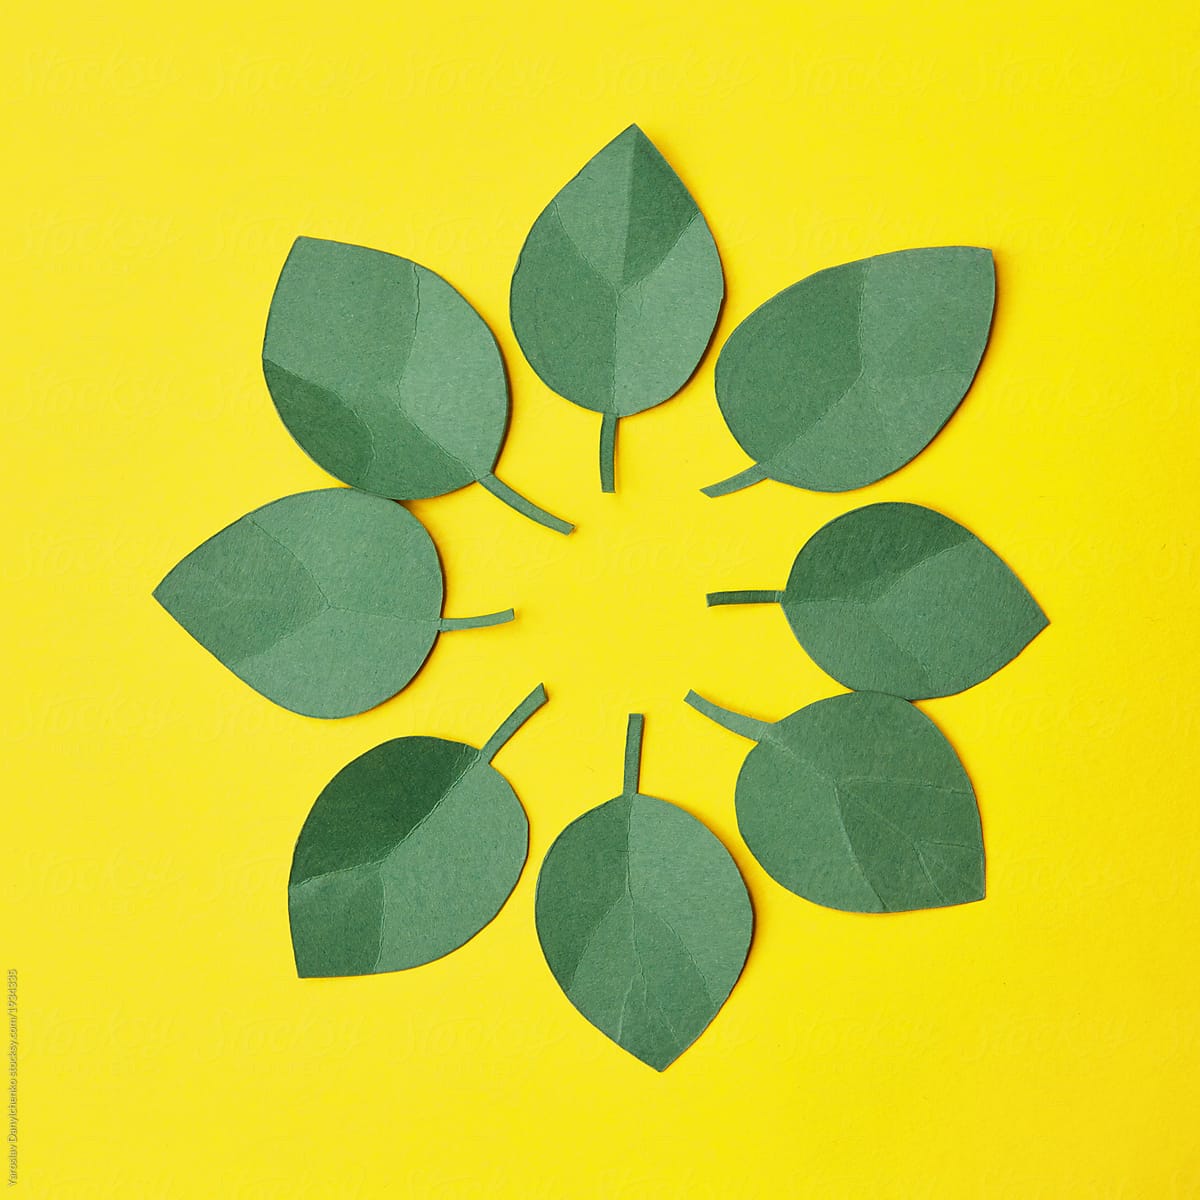 Paper craft green leaves in round shape on a yellow background,